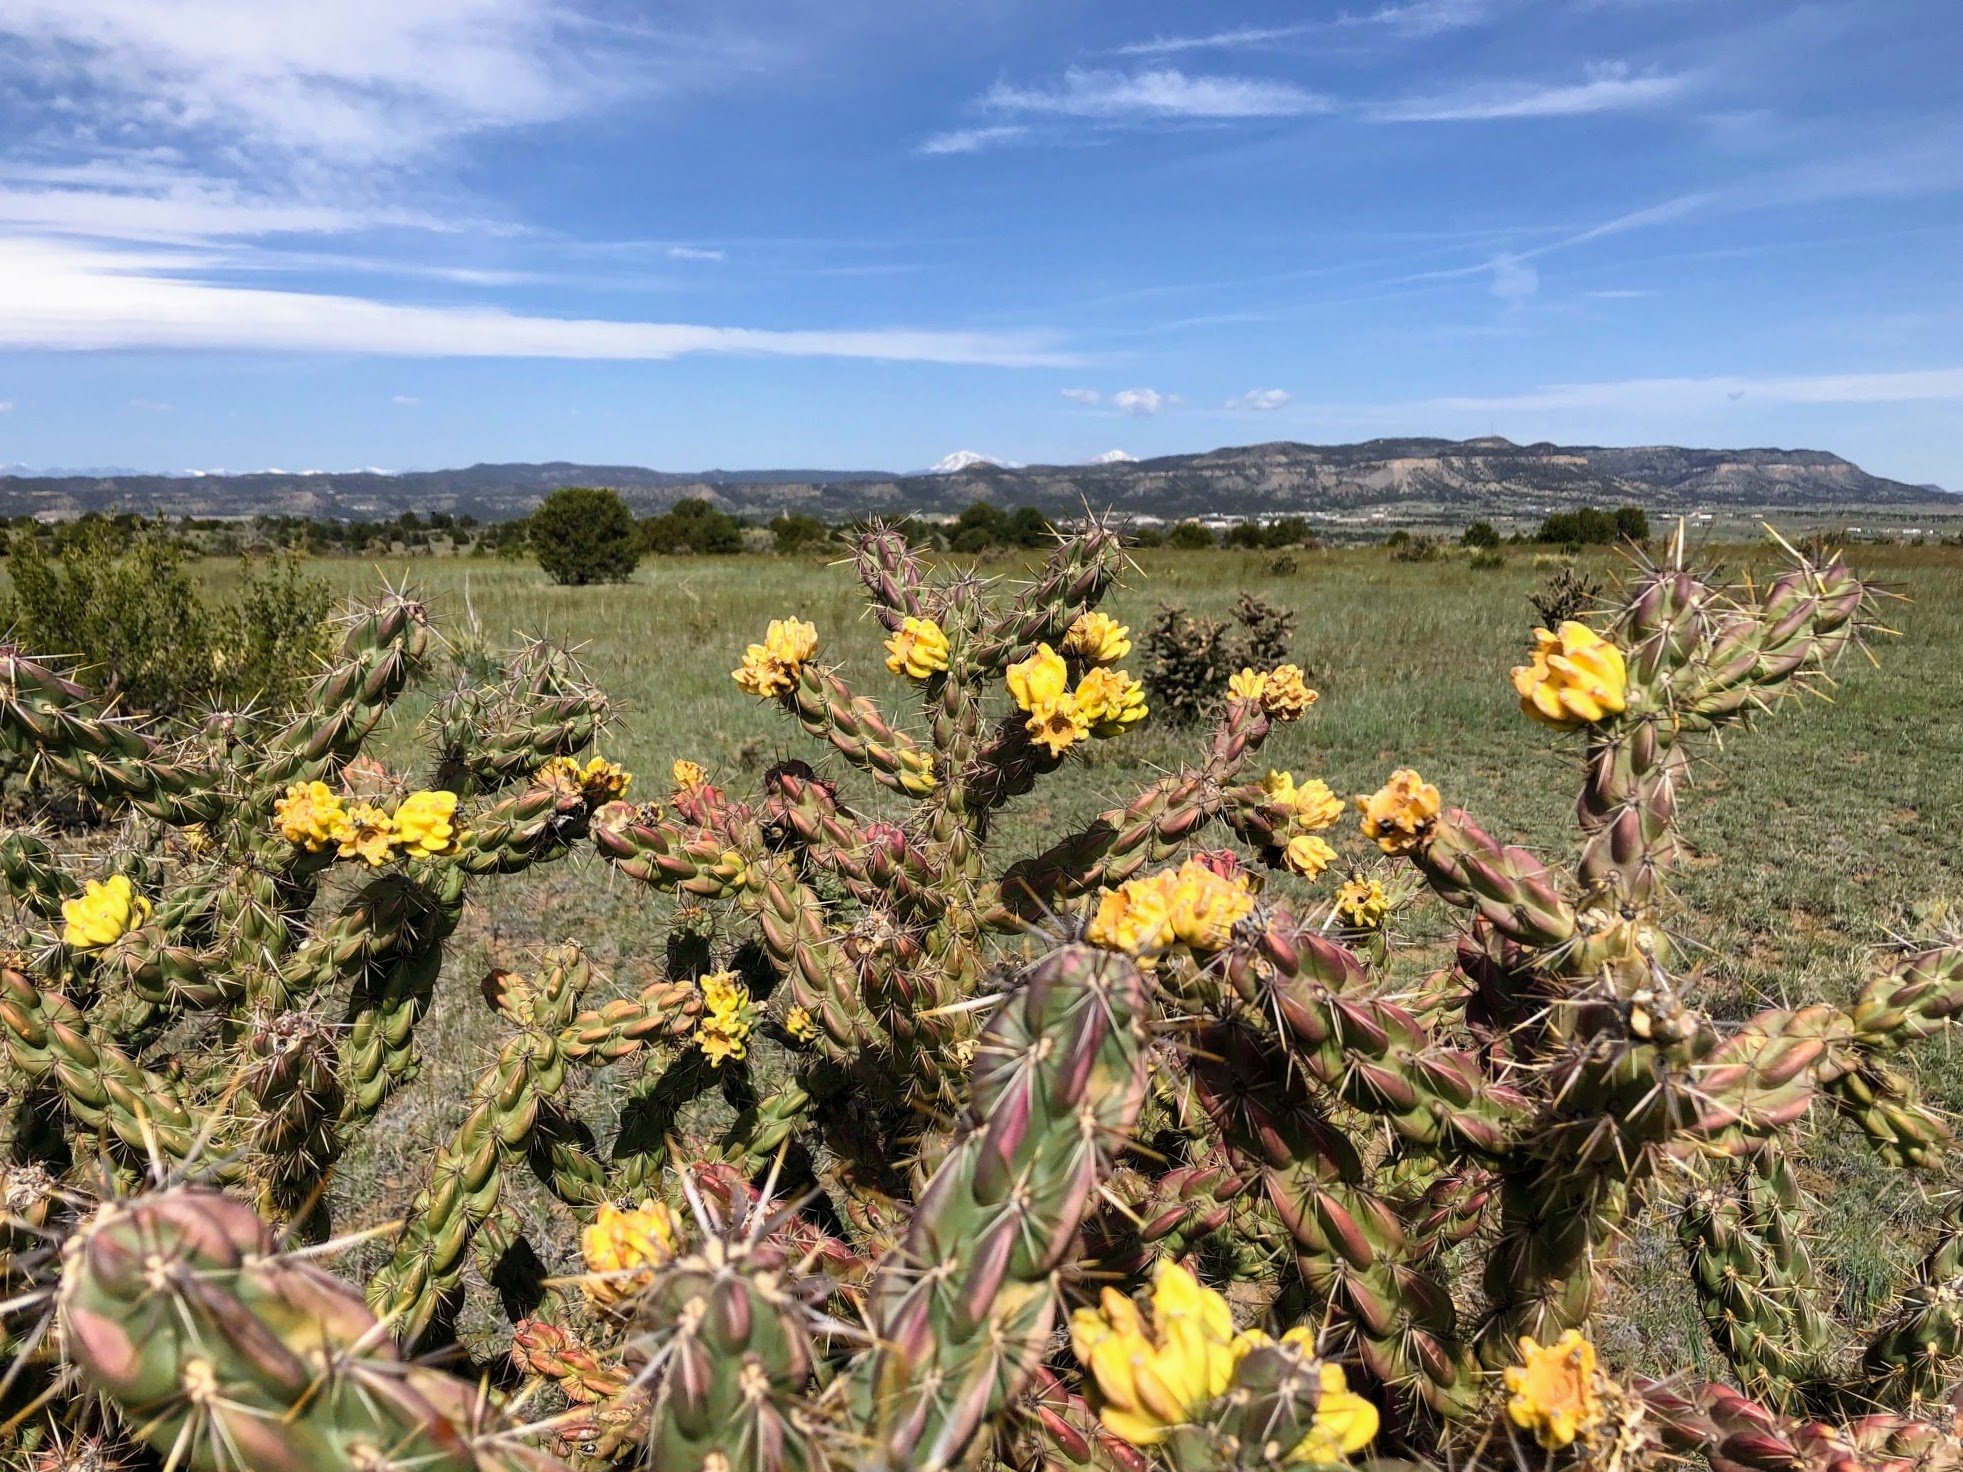 Spiky cacti with flowers in the foreground, a field and hills in the background.